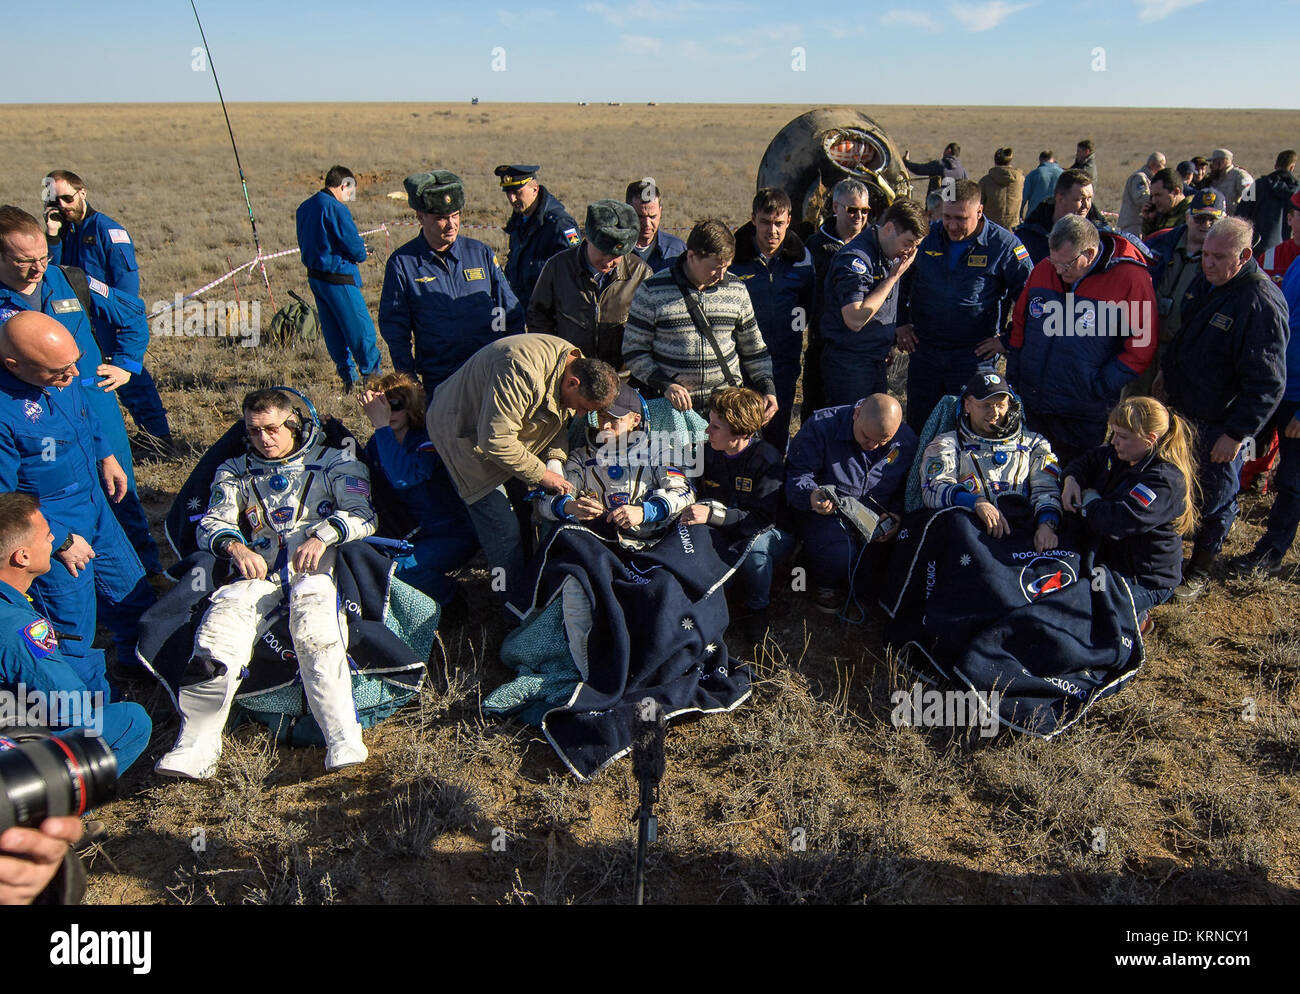 NASA astronaut Shane Kimbrough, left, Russian cosmonaut Sergey Ryzhikov of Roscosmos, center, and Russian cosmonaut Andrey Borisenko of Roscosmos sit in chairs outside the Soyuz MS-02 spacecraft a few moments after they landed in a remote area near the town of Zhezkazgan, Kazakhstan on Monday, April 10, 2017 (Kazakh time).  Kimbrough, Ryzhikov, and Borisenko are returning after 173 days in space where they served as members of the Expedition 49 and 50 crews onboard the International Space Station. Photo Credit: (NASA/Bill Ingalls) Expedition 50 Soyuz MS-02 Landing (NHQ201704100002) Stock Photo